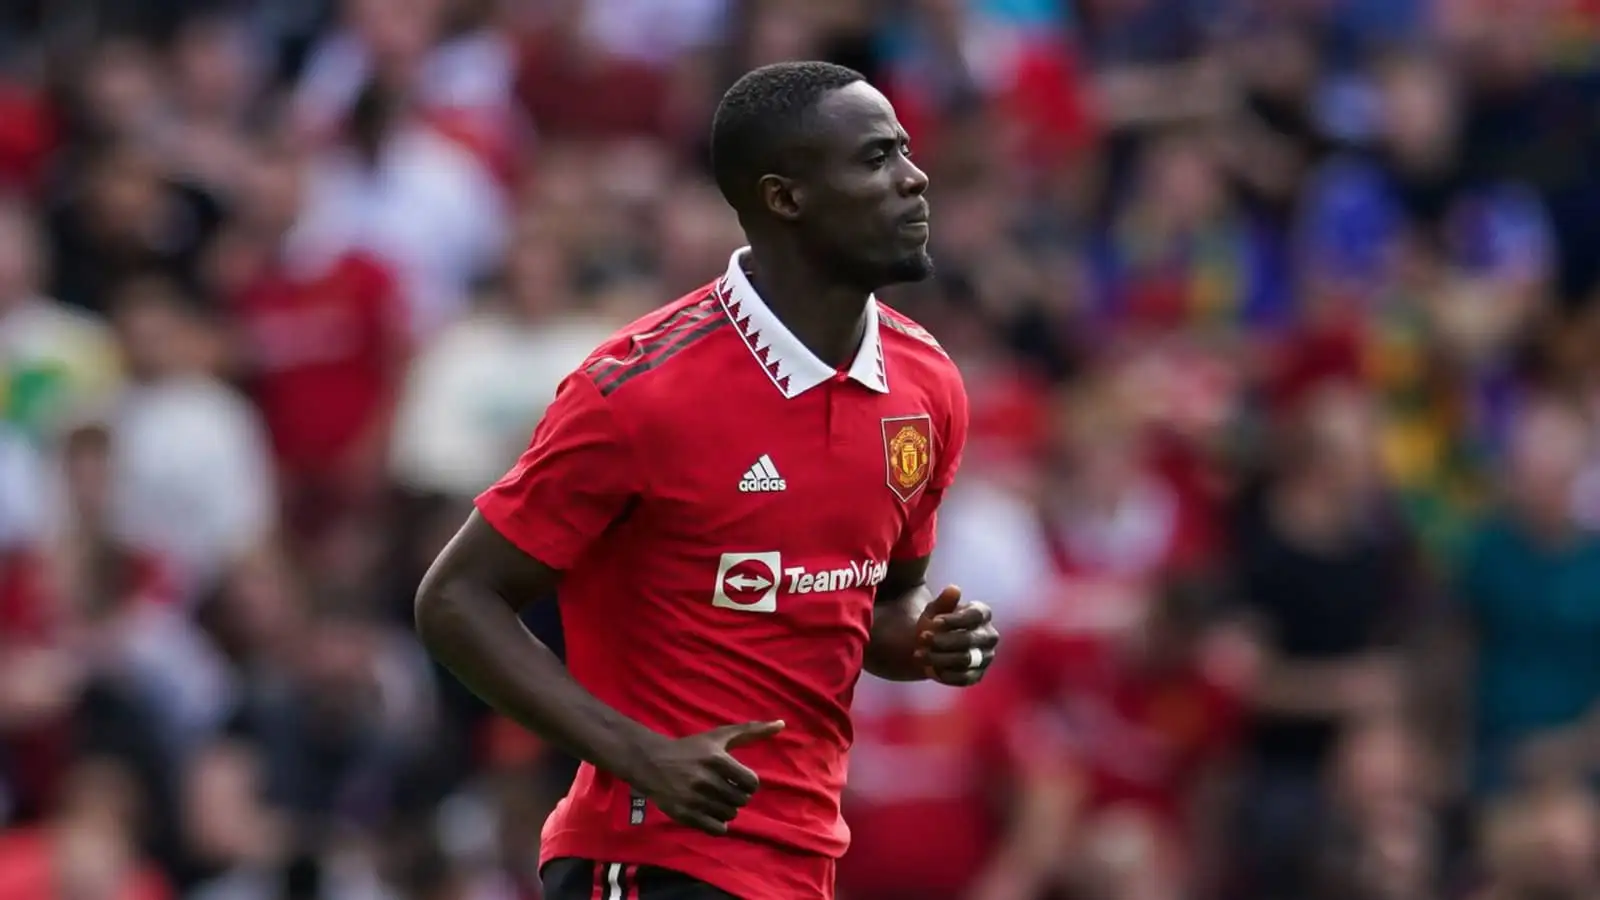 Marseille seal loan deal for Man Utd outcast Eric Bailly with cut-price permanent option